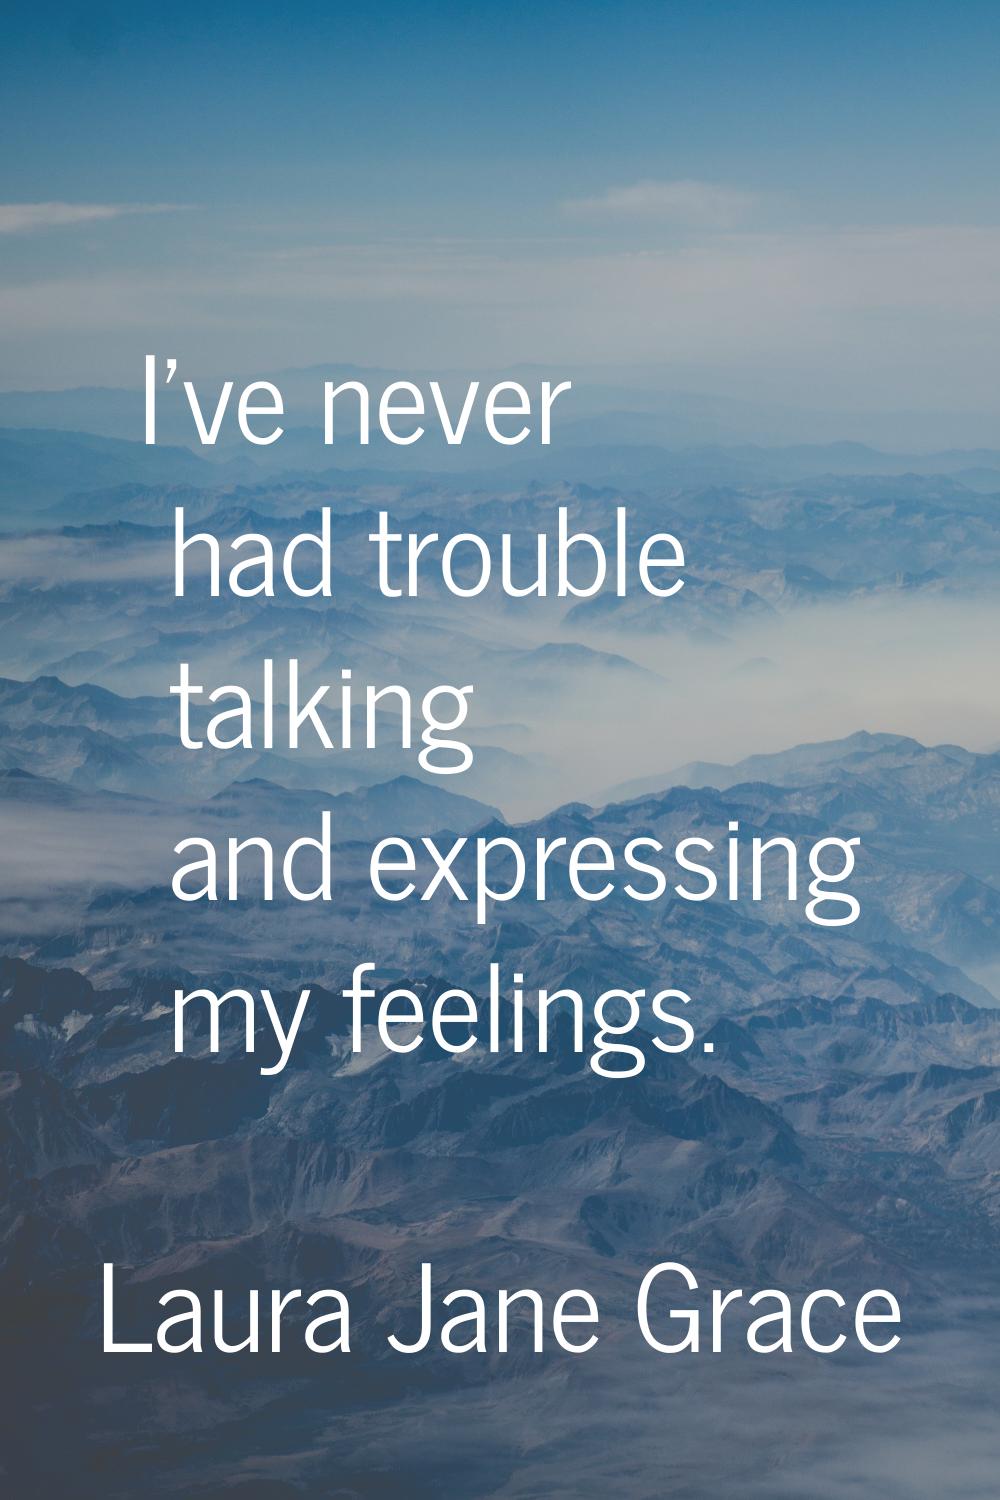 I've never had trouble talking and expressing my feelings.